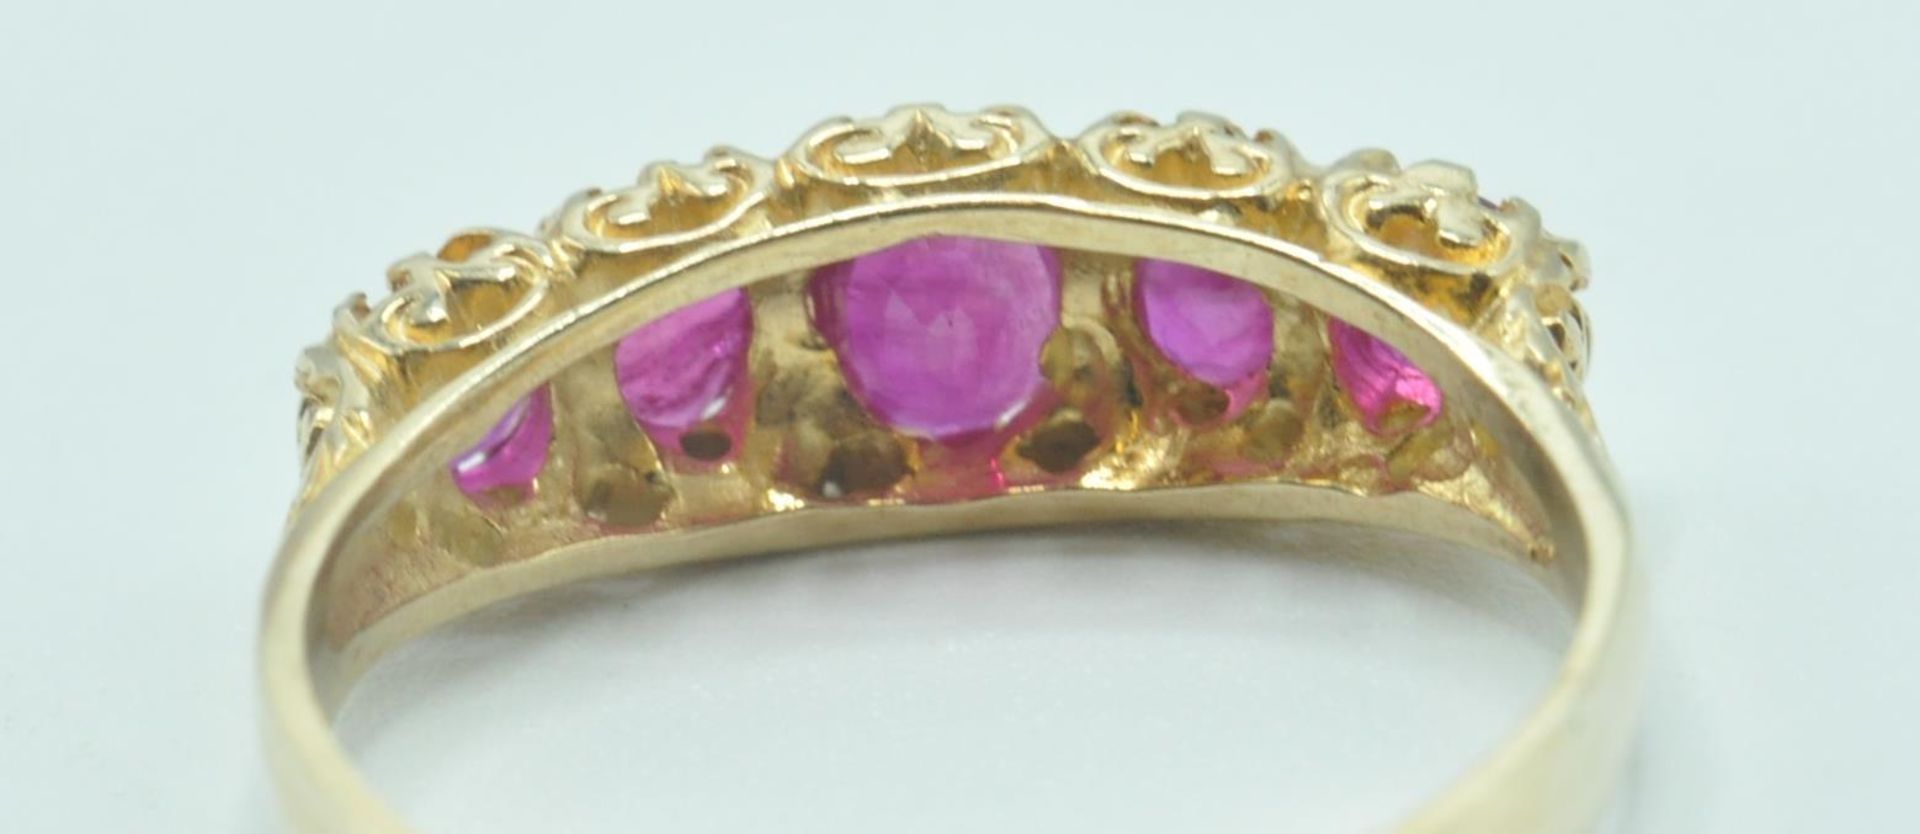 9CT GOLD AND PINK STONE FIVE STONE RING - Image 4 of 6